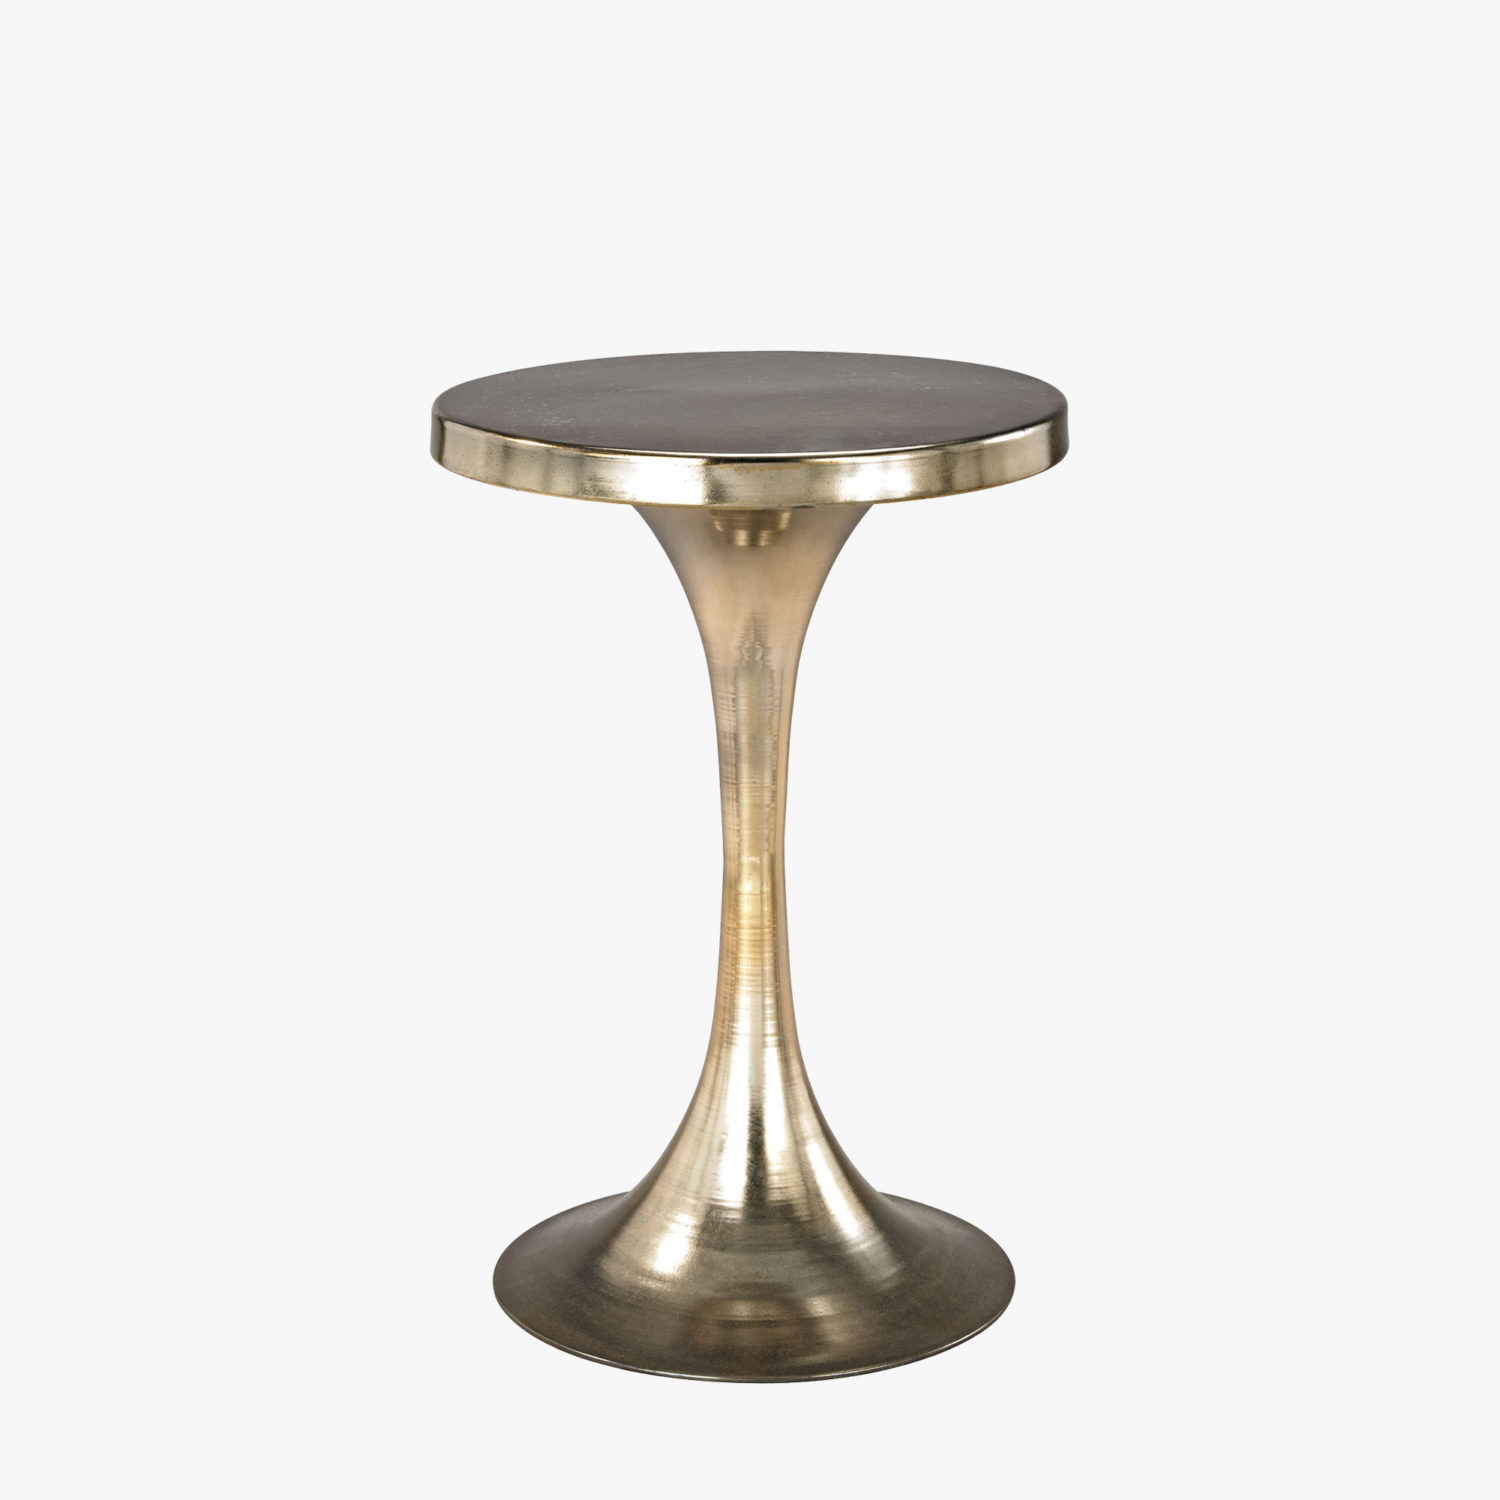 antique gold pedestal accent table tables dear keaton white round plastic covers dining toronto gray coffee and end home entertainment furniture chestnut whole tablecloths for